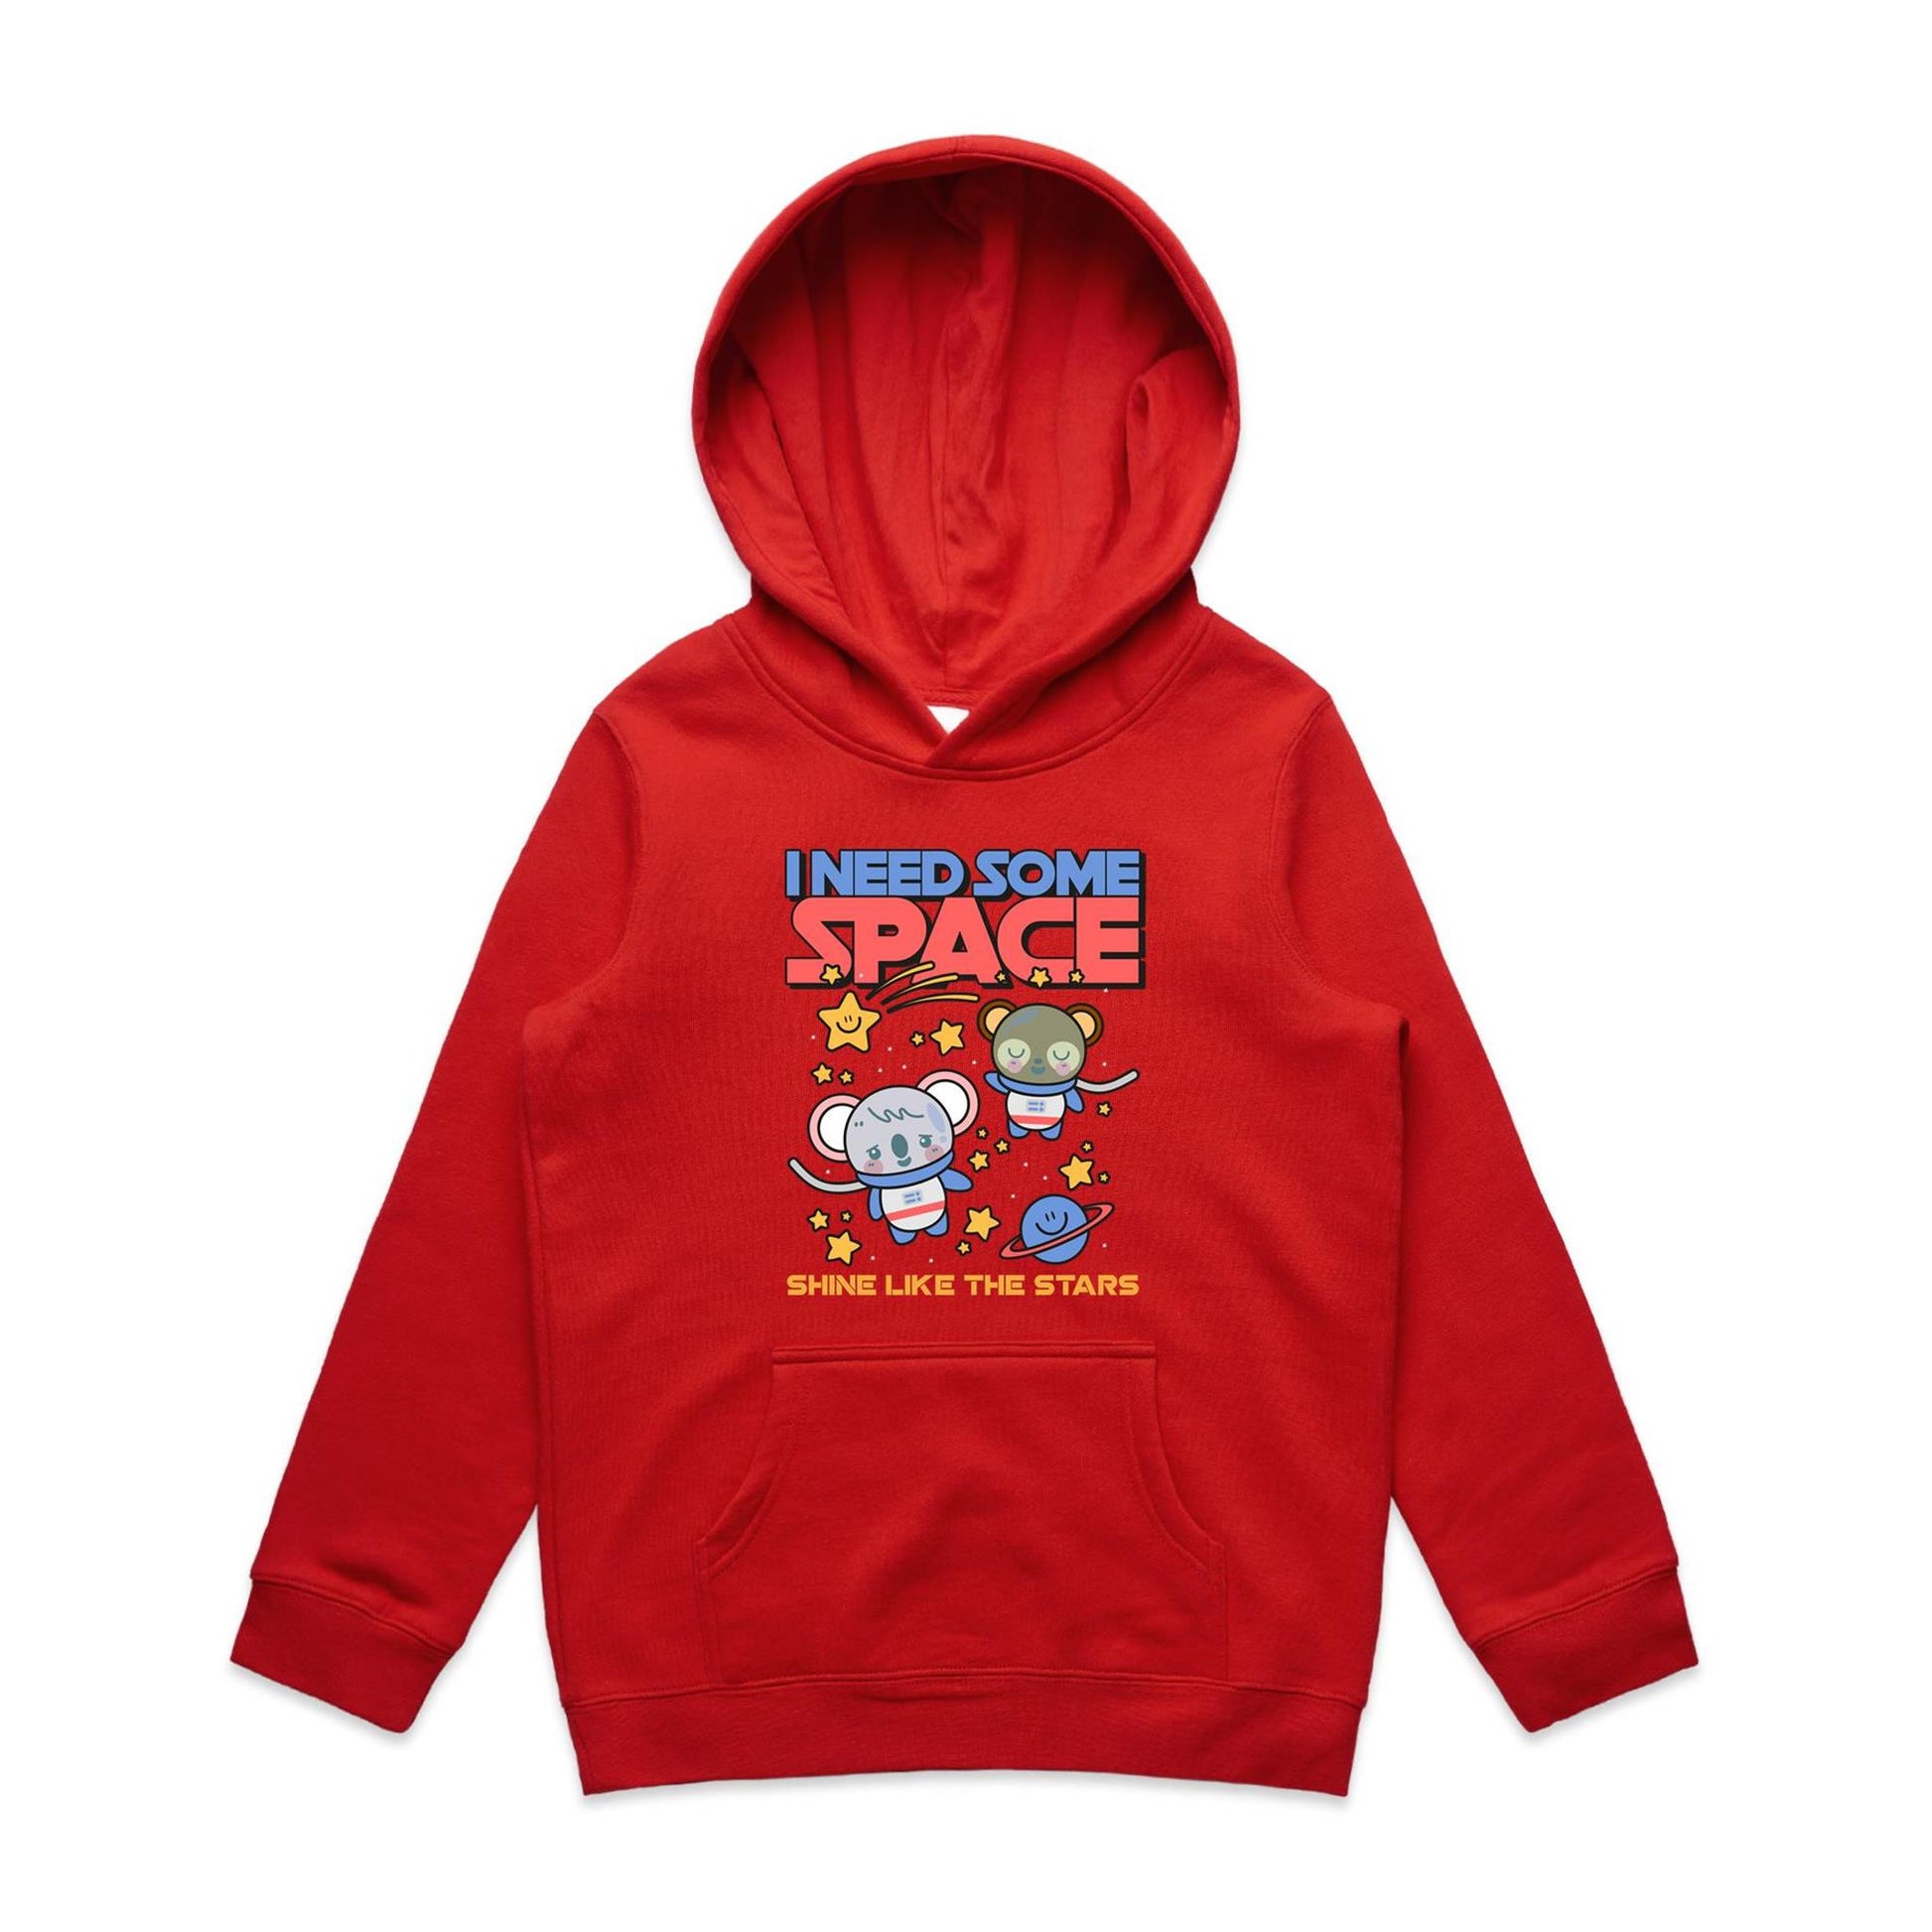 I Need Some Space - Youth Supply Hood Red Kids Hoodie Space